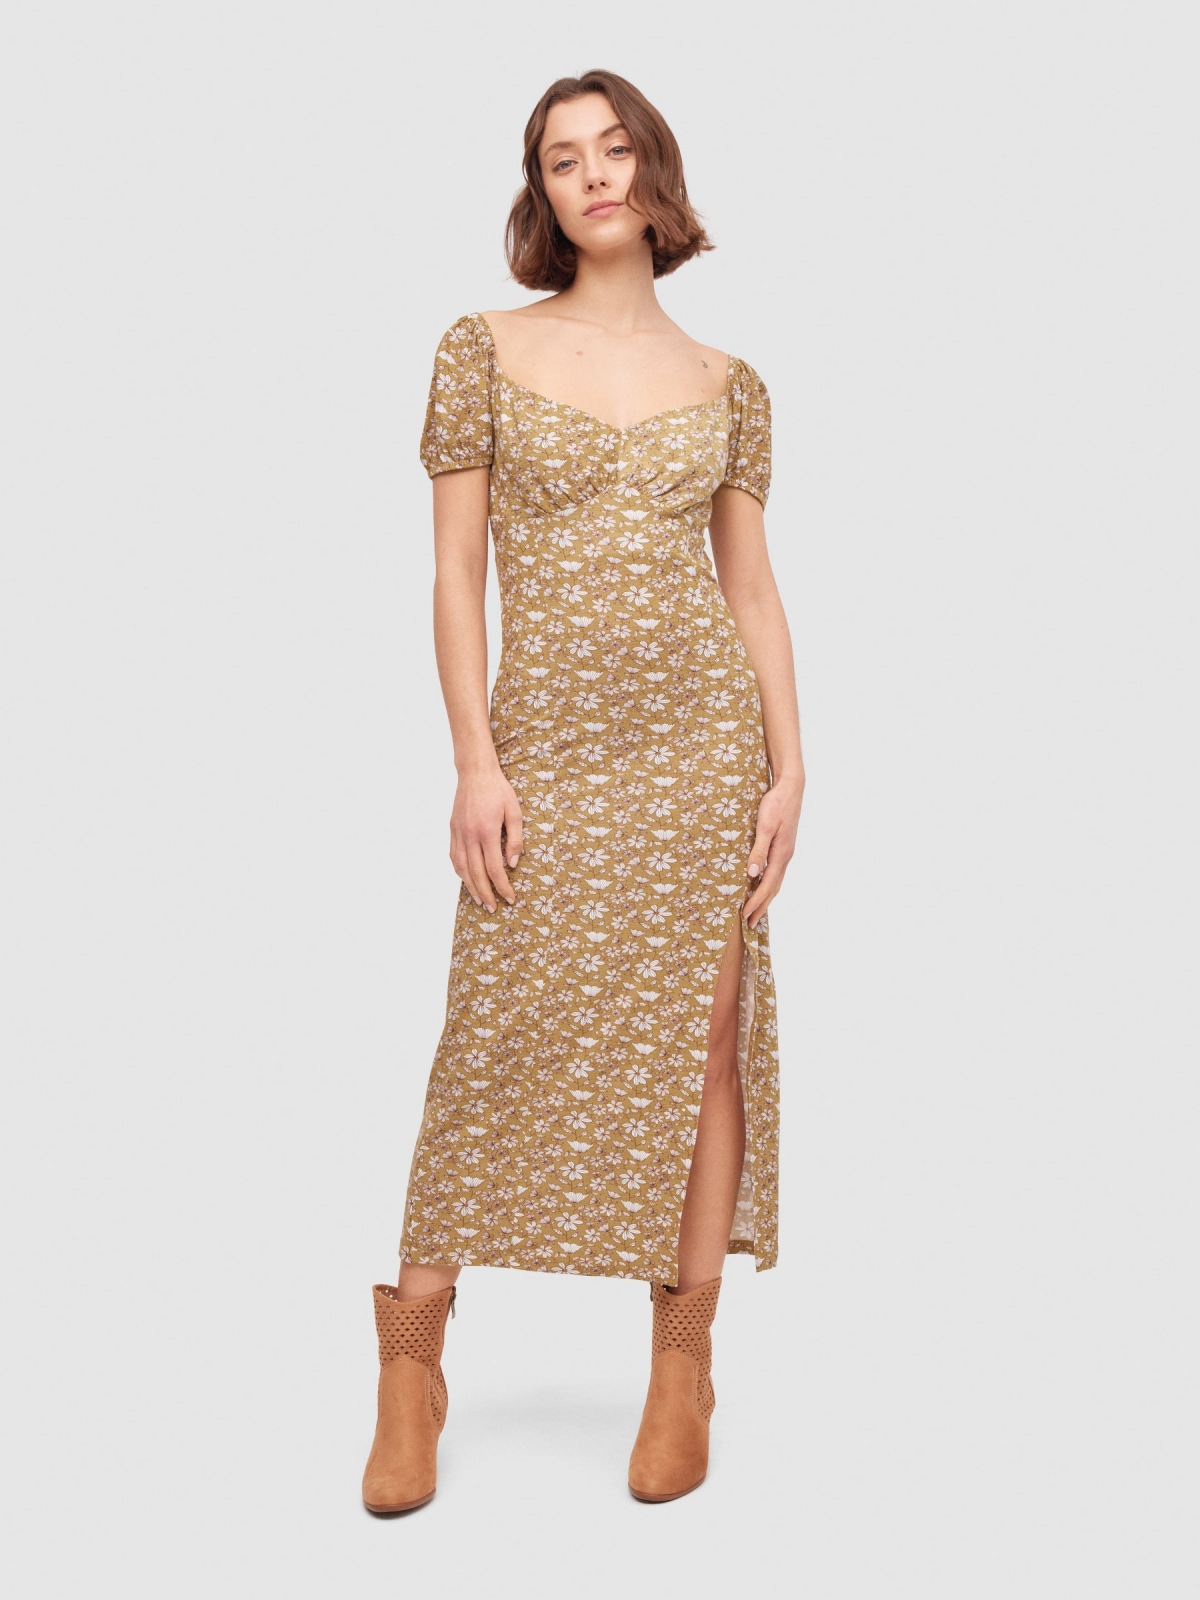 Floral midi dress sand middle front view